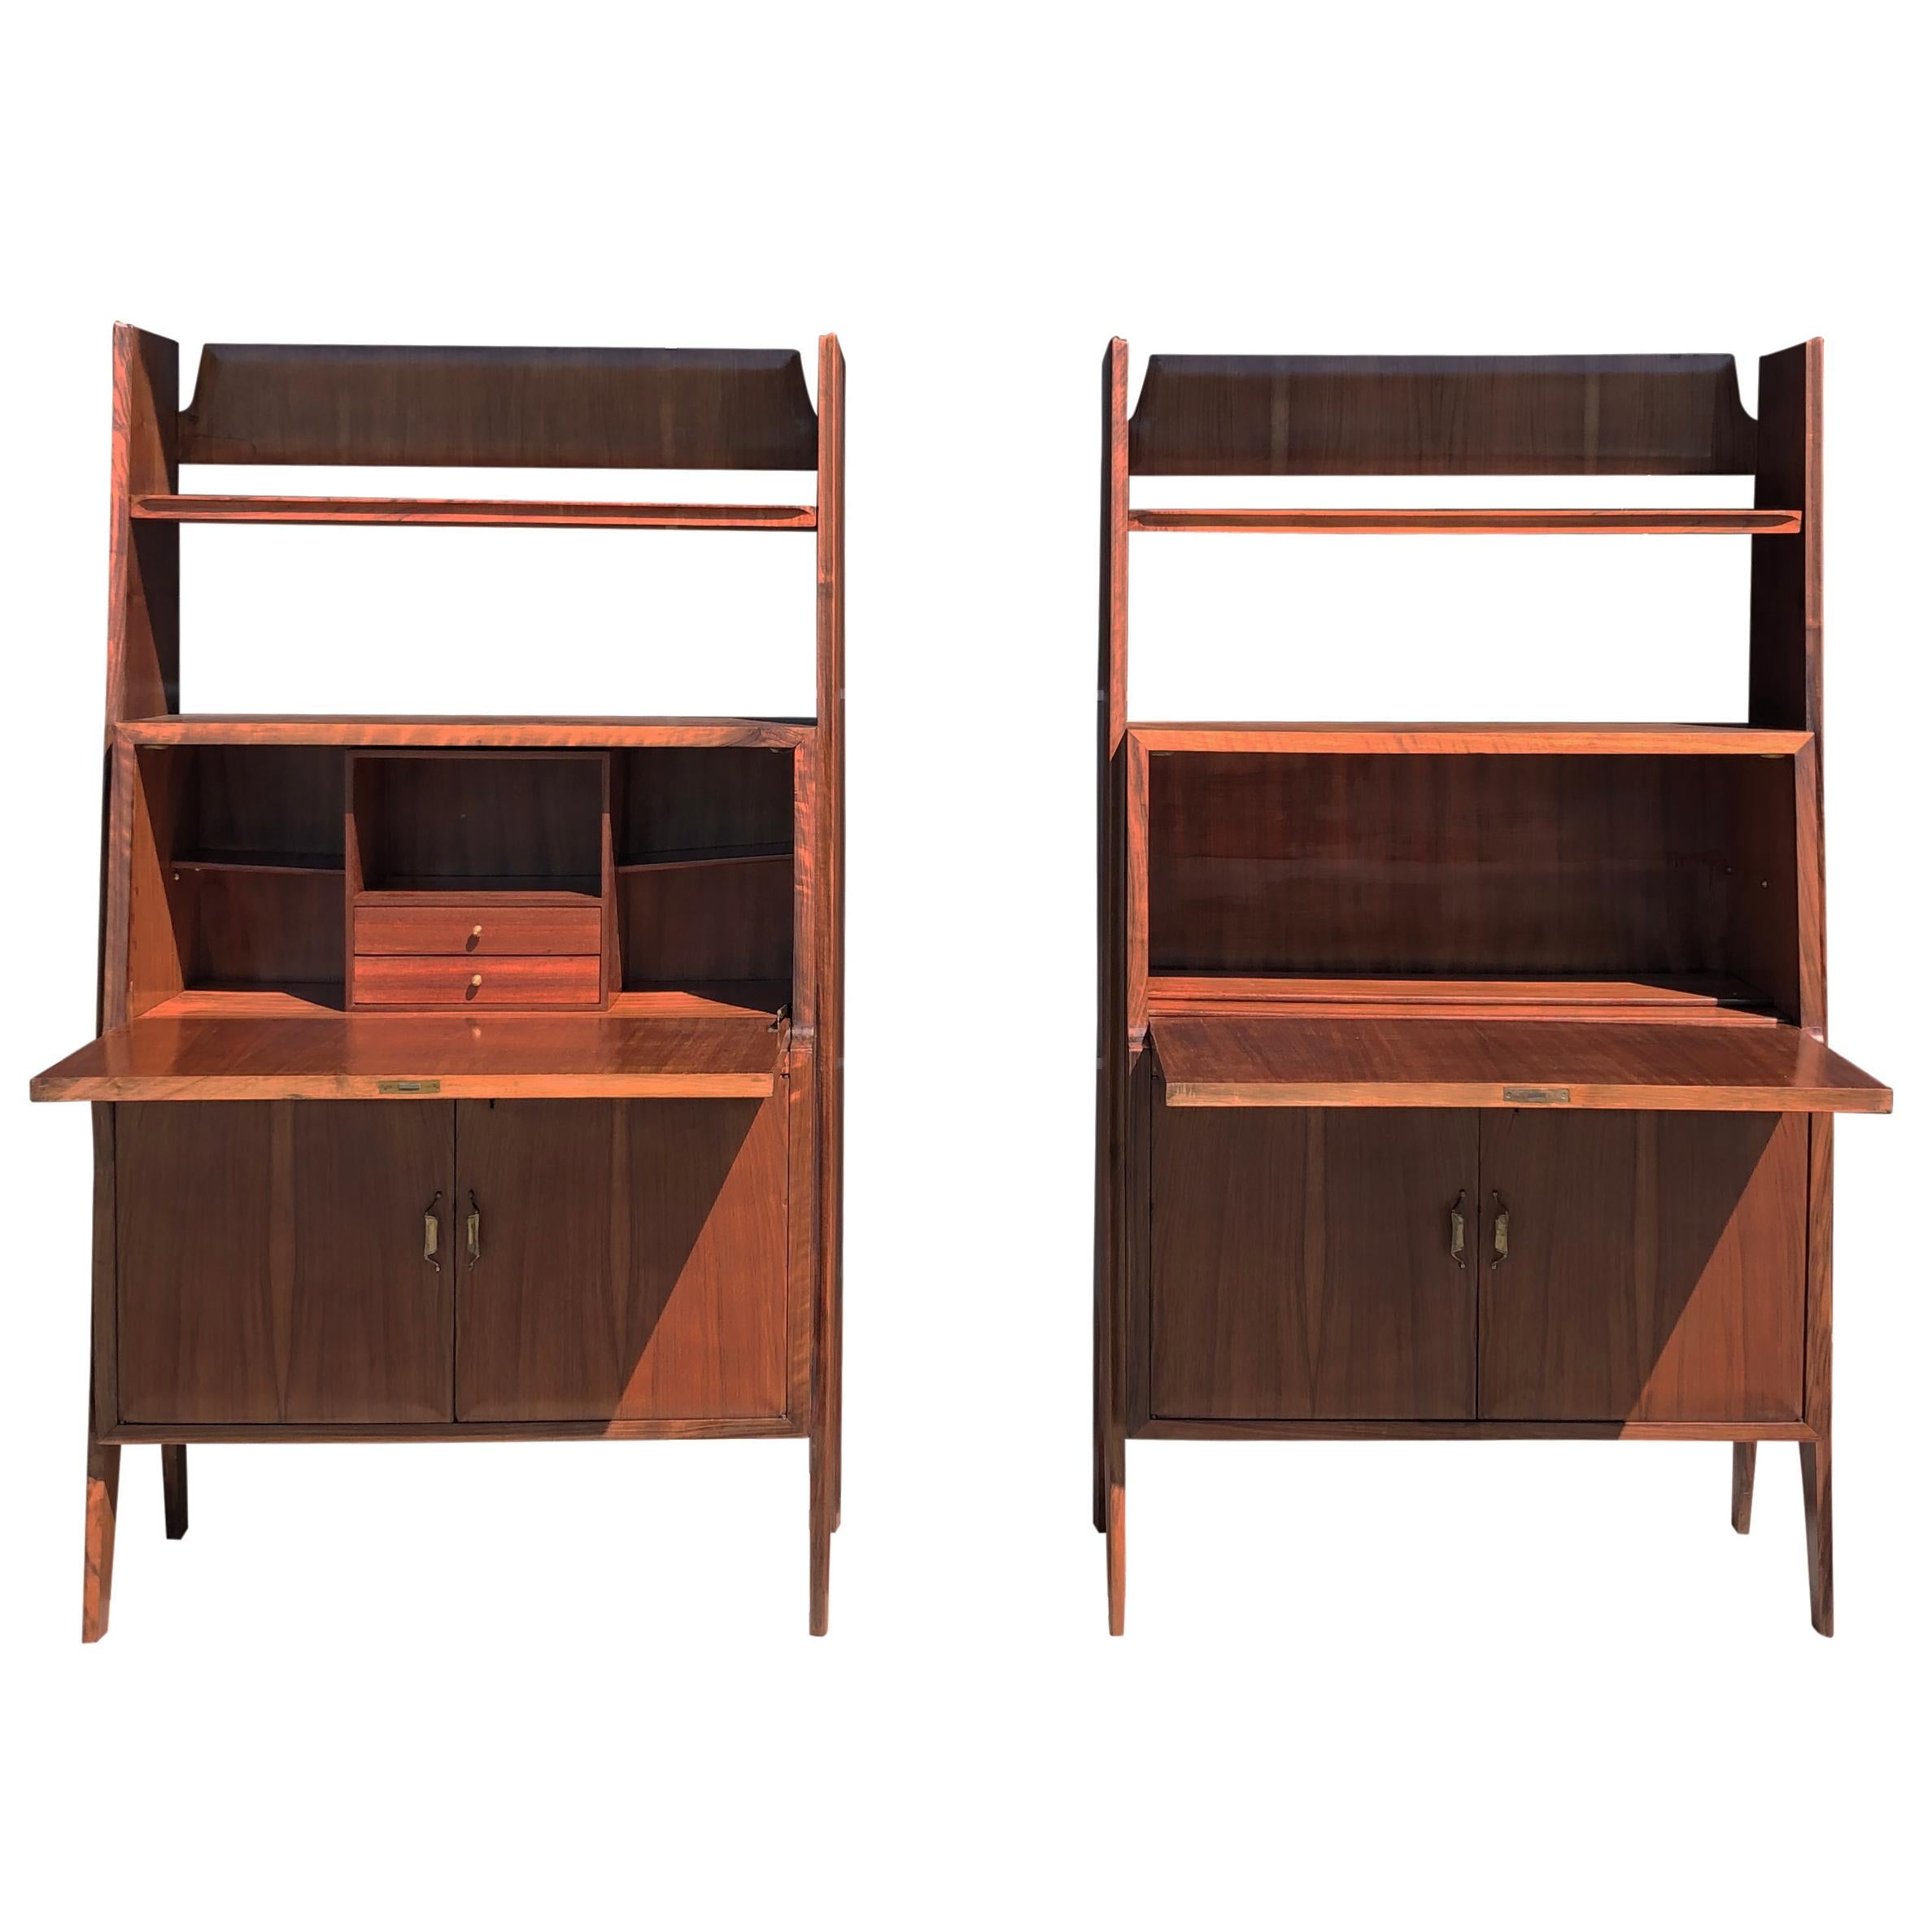 A dark-brown, vintage Mid-Century Modern Italian pair of cabinet writing desks (his and hers) with a two door bases and shelving tops, designed by Silvio Cavatorta. The front writing surfaces shows the beautiful inlays of typical classic motives in